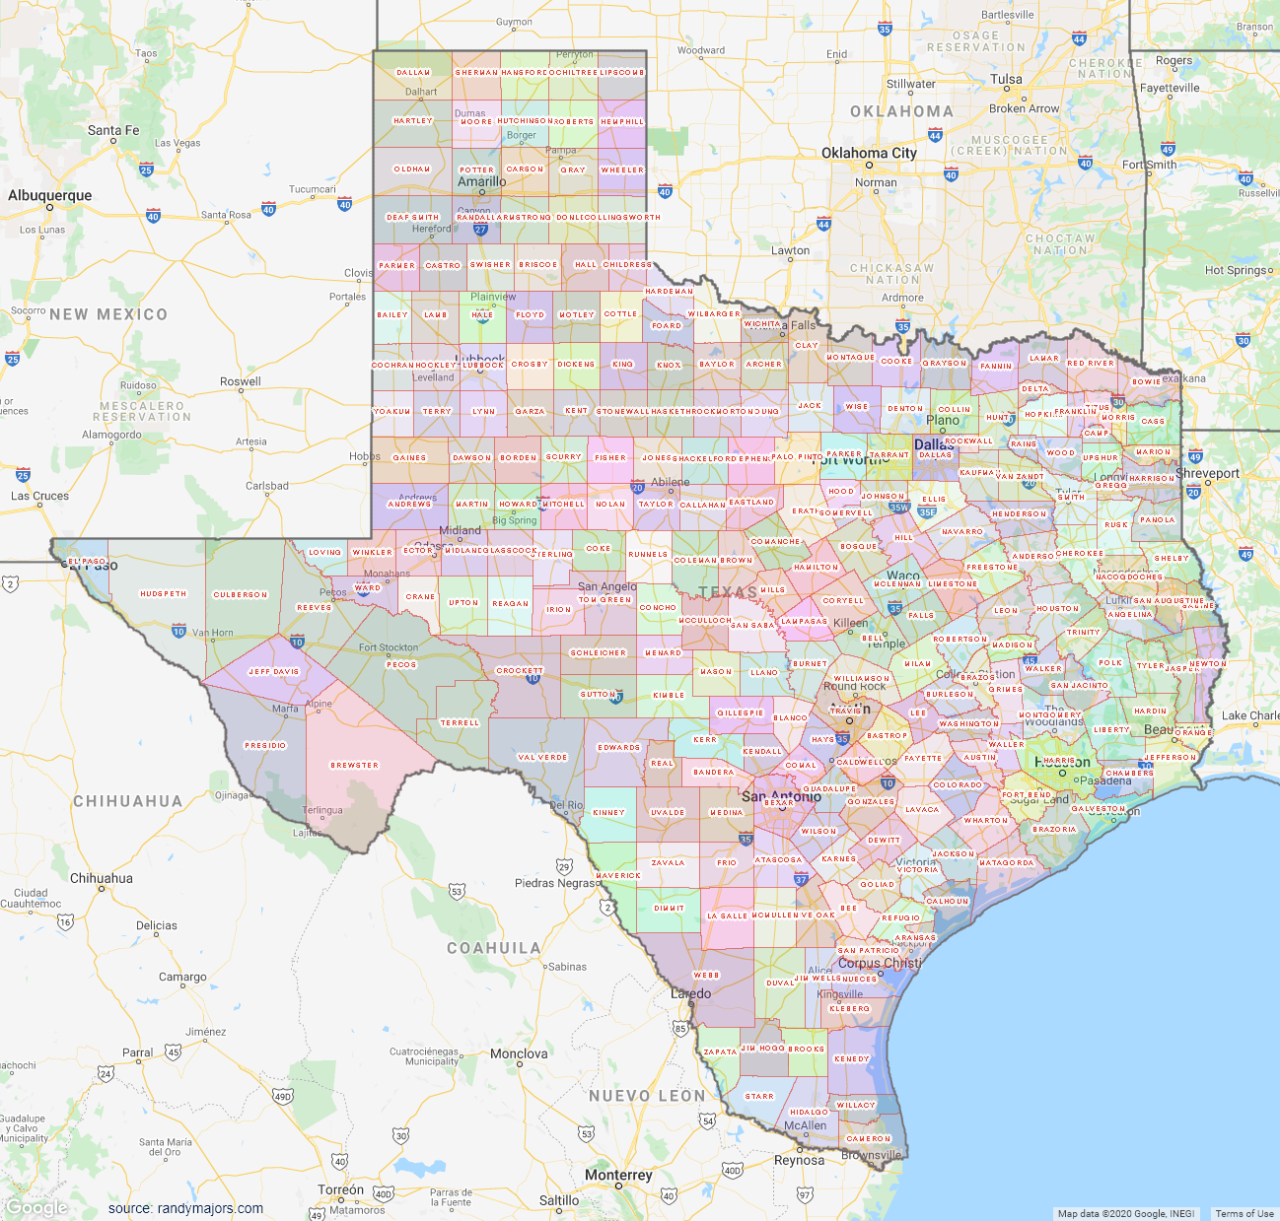 Texas County Map – shown on Google Maps